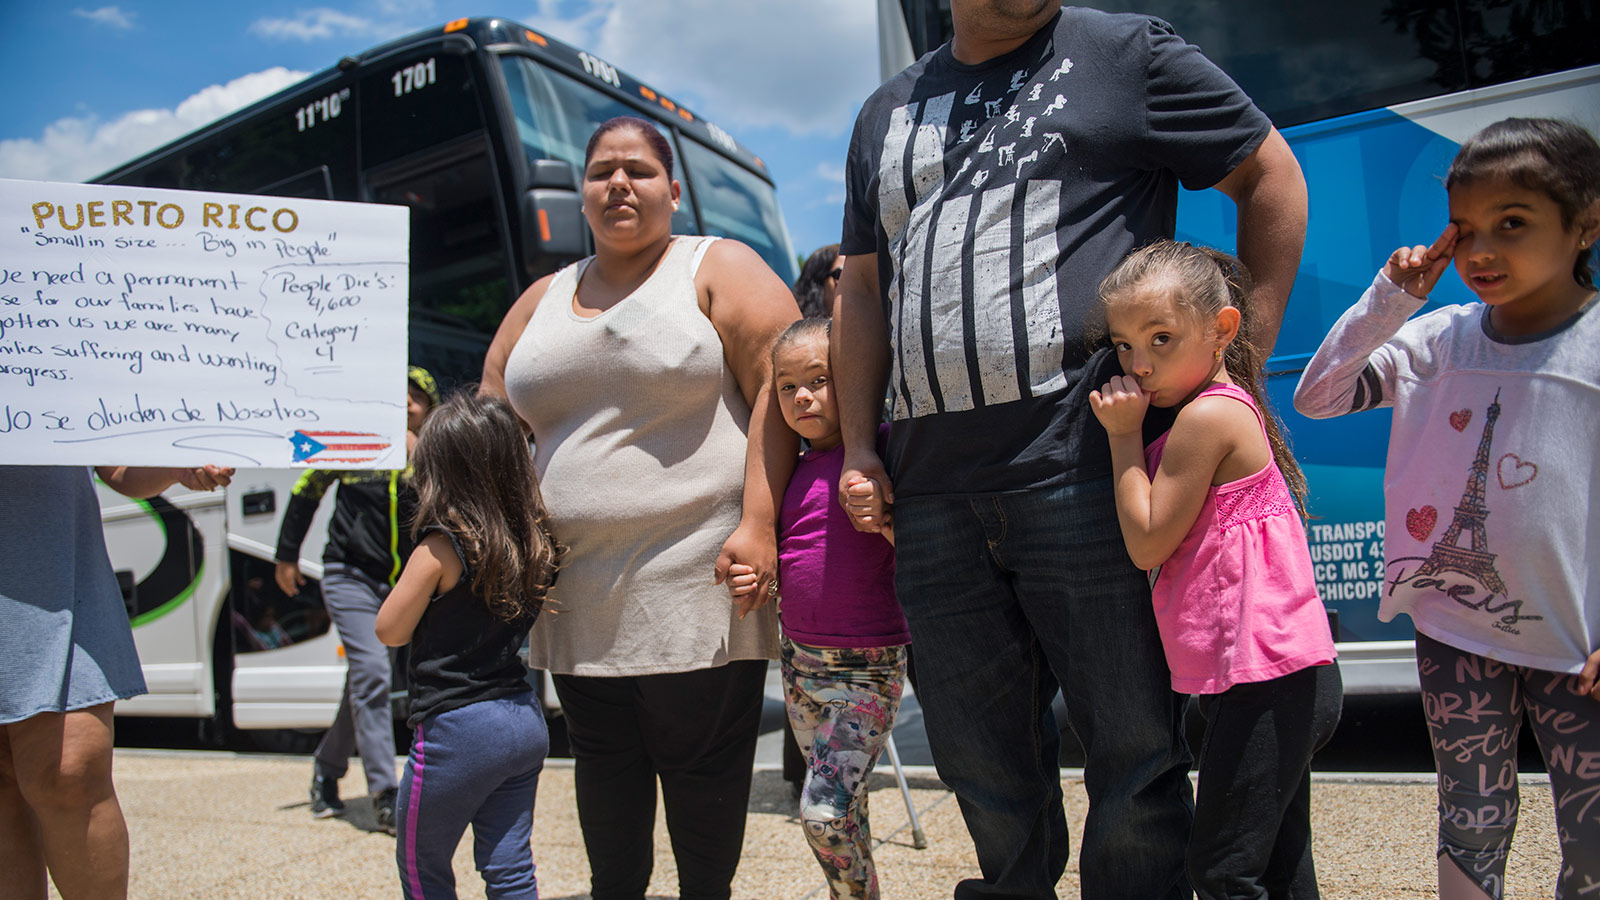 Puerto Ricans who were displaced by Hurricane Maria, arrive in buses from western Massachusetts on First St., NE, on June 6, 2018.